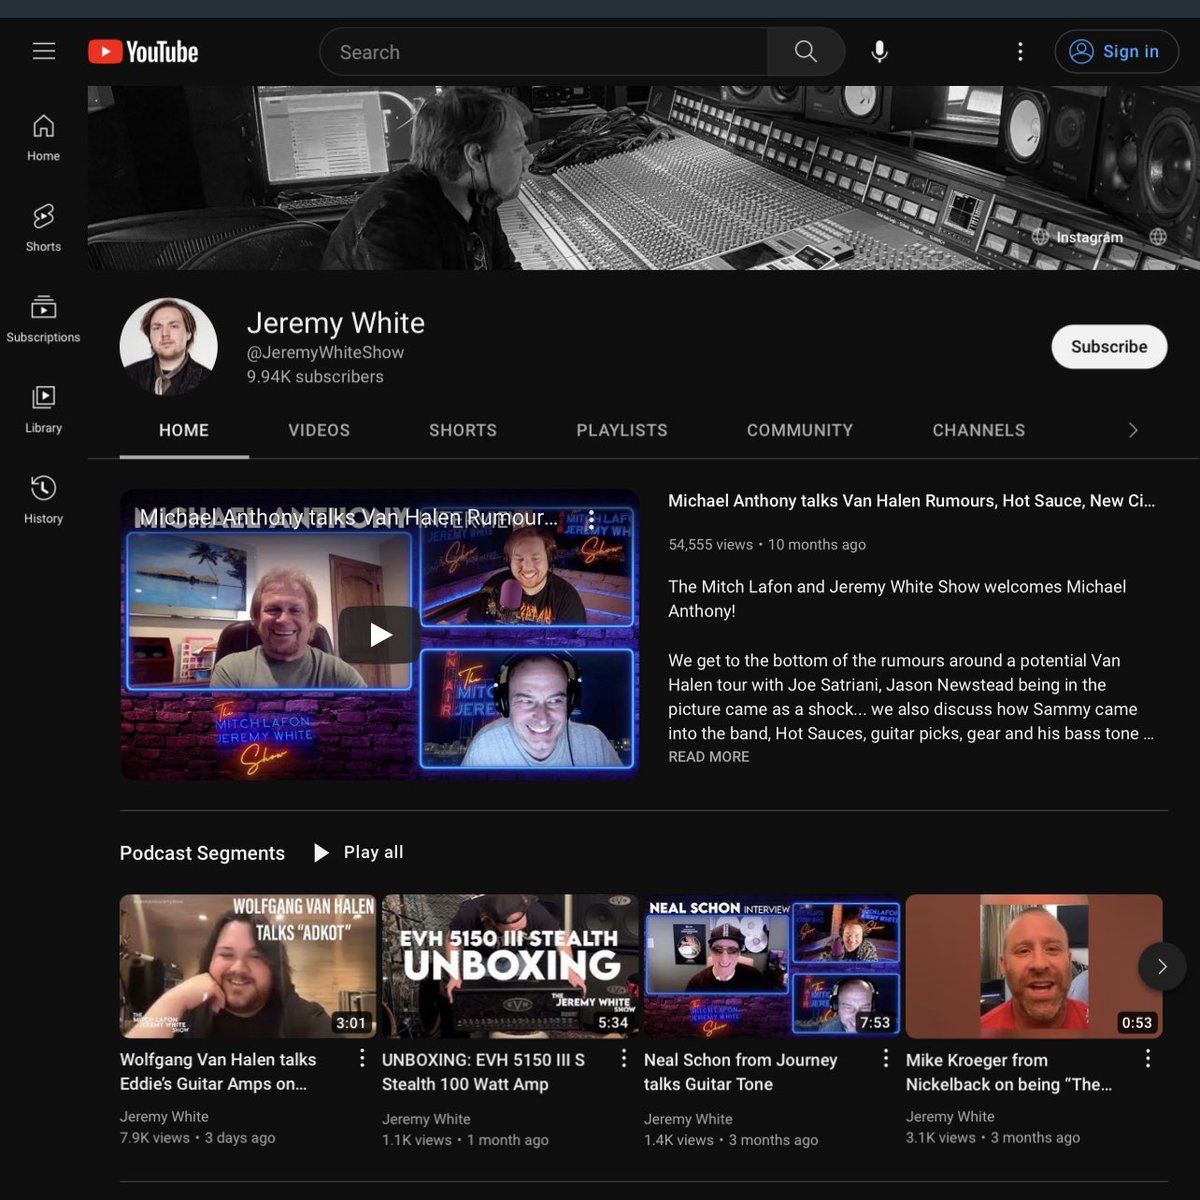 Happy Monday everyone! 

My YouTube channel is nearly at 10,000 subscribers and I would LOVE if you could help me crack that number this week. Link is below to subscribe! Lots of great new content coming soon 🤘🏻⚡️🔥 #podcast #guitar #musicinterviews 

YouTube.com/jeremywhiteshow